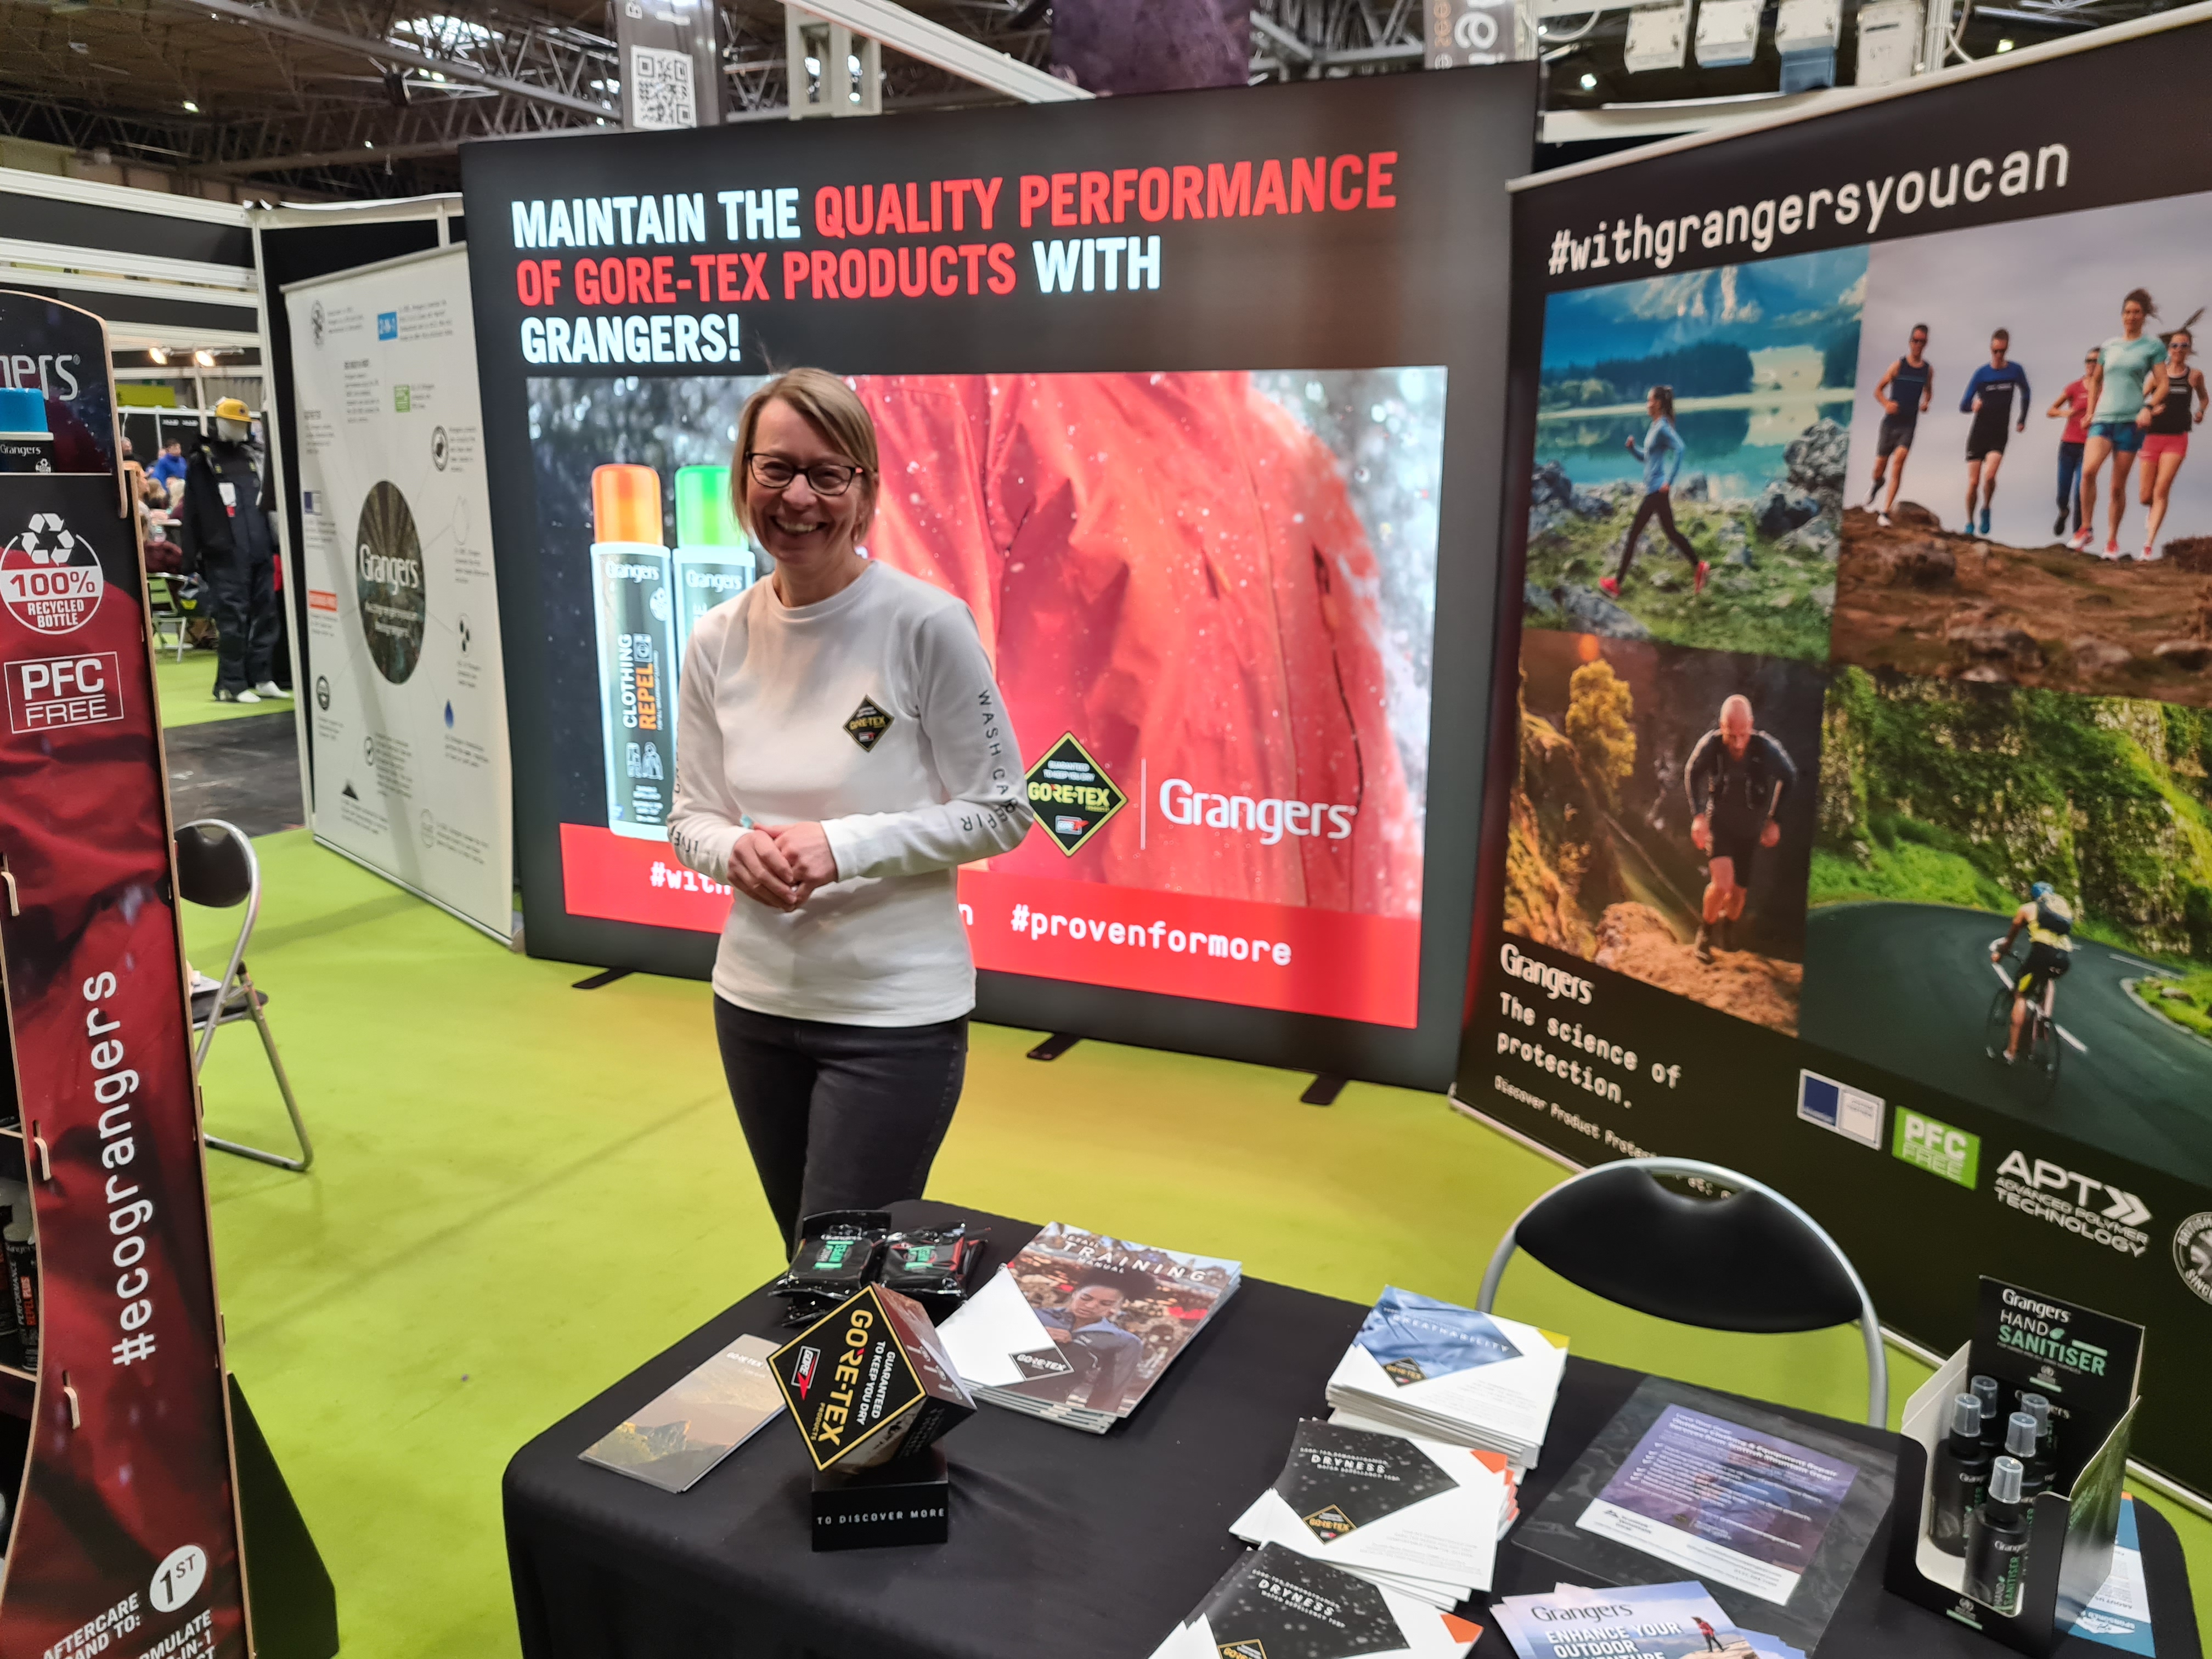 Debbie was a trainer for Goretex on the Grangers stand. She confirmed that it is not just Shakedry technology that is being abandoned,  other Gore products are also to go as they concentrate on EPE membrane technology moving forward